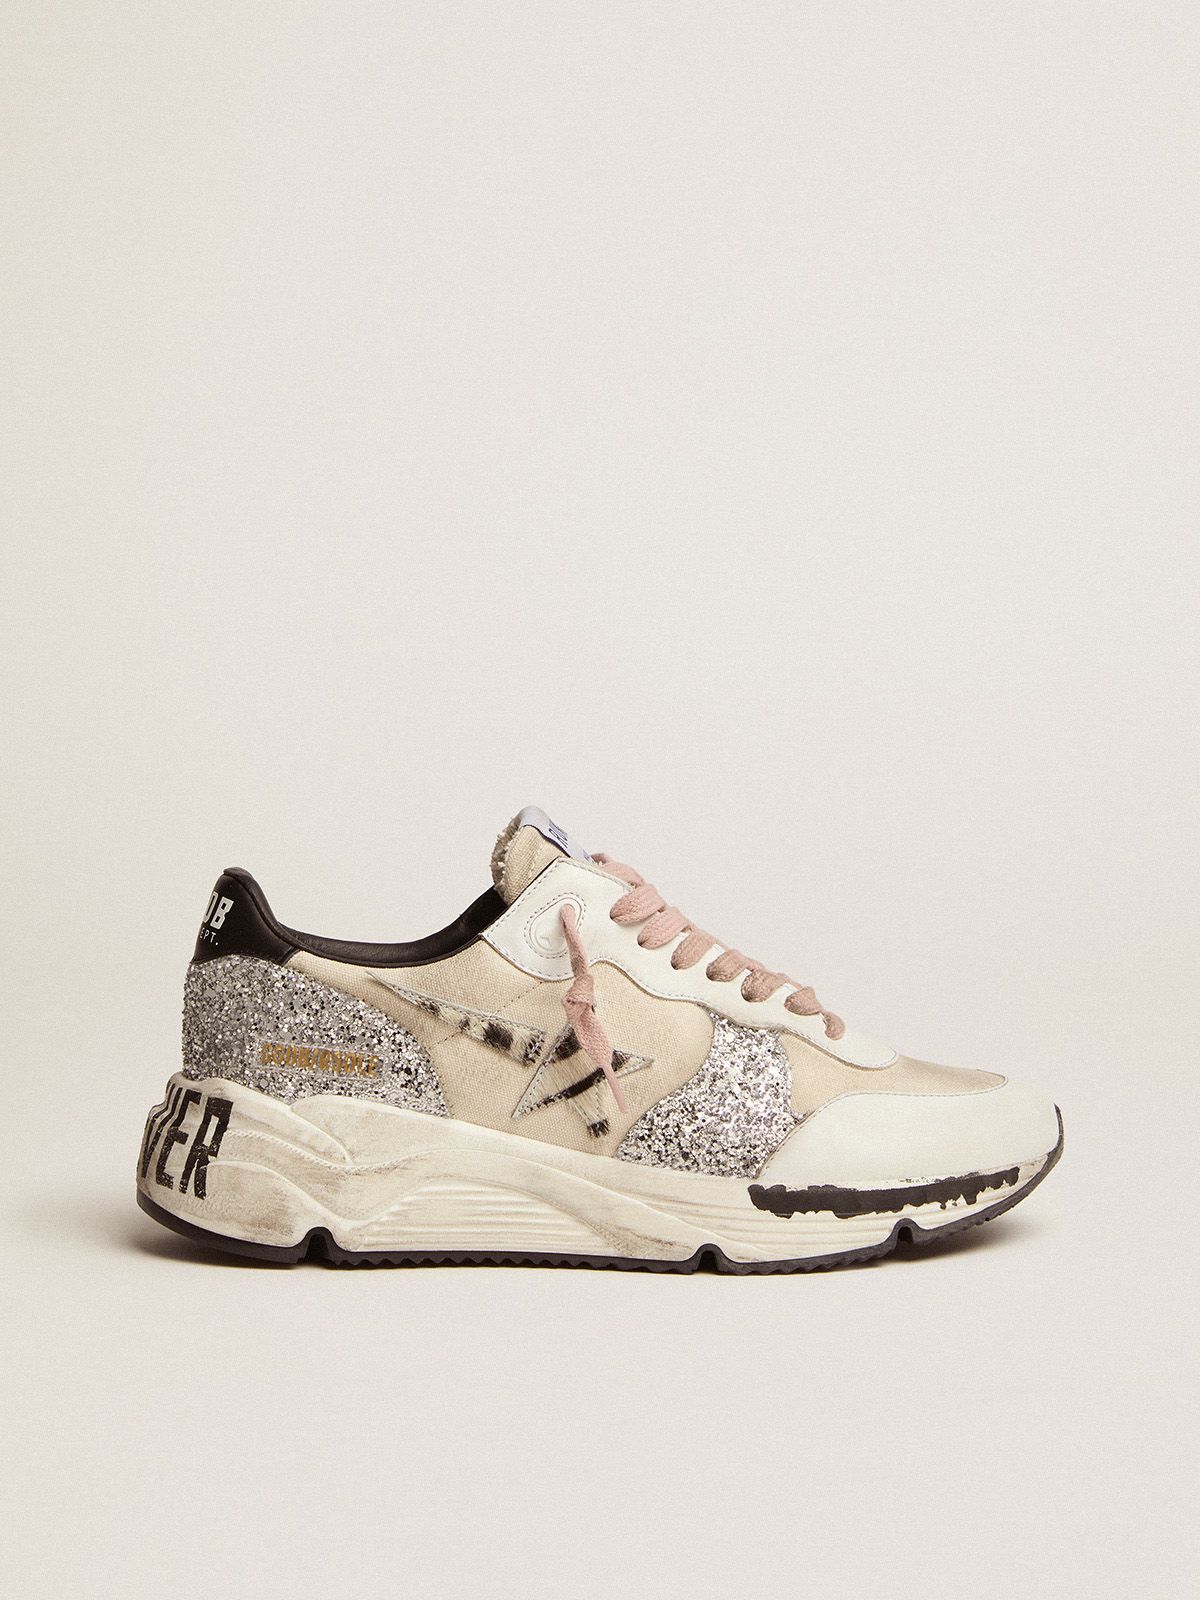 golden goose pony with sneakers cream skin star zebra-print and upper Running canvas Sole